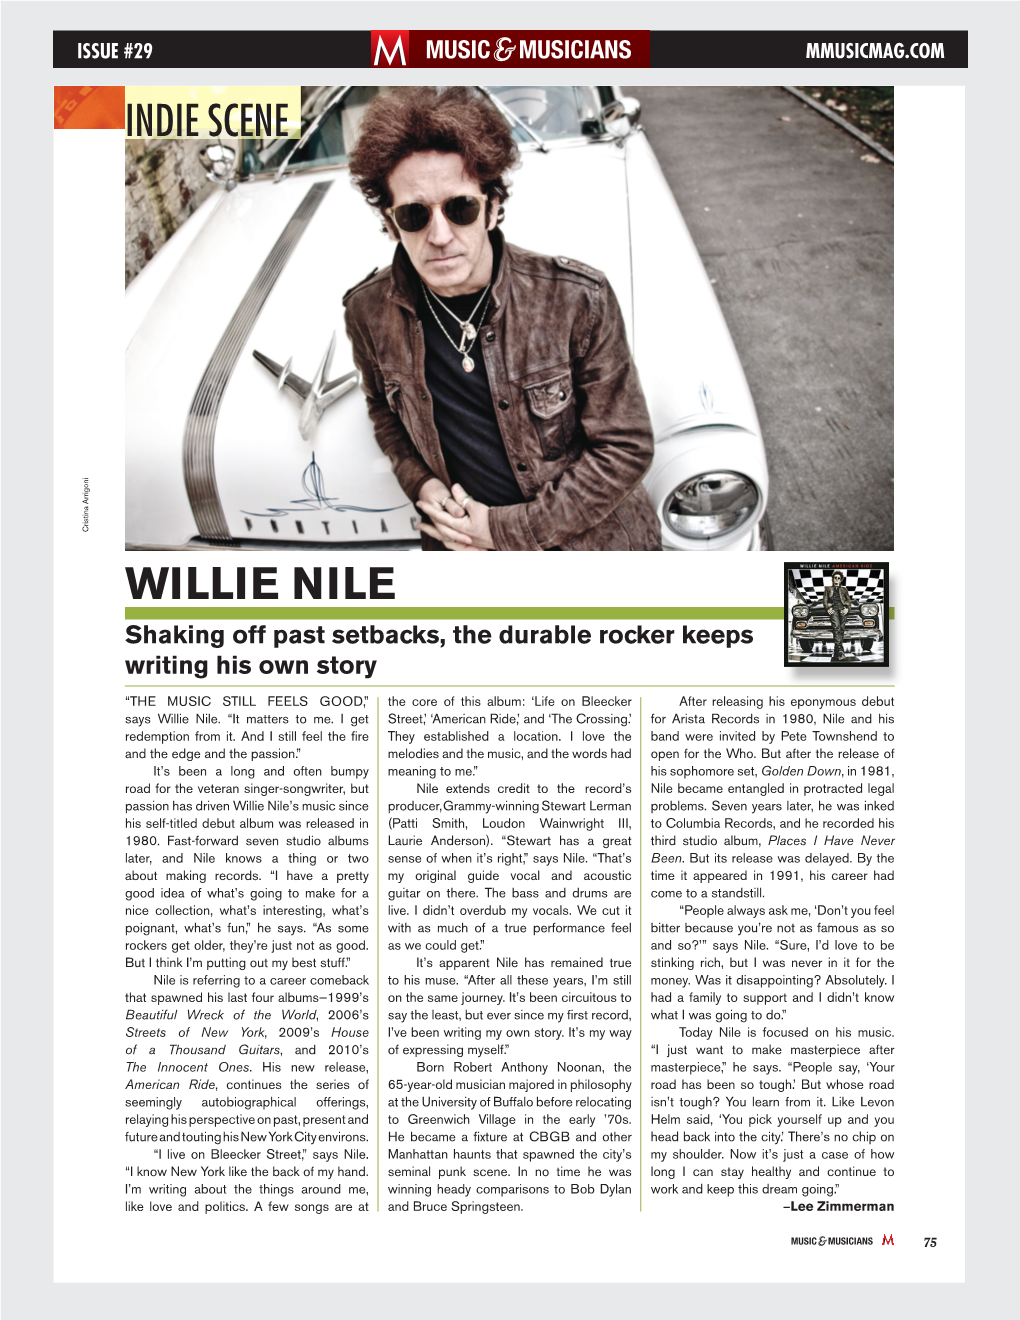 Willie Nile Shaking Off Past Setbacks, the Durable Rocker Keeps Writing His Own Story